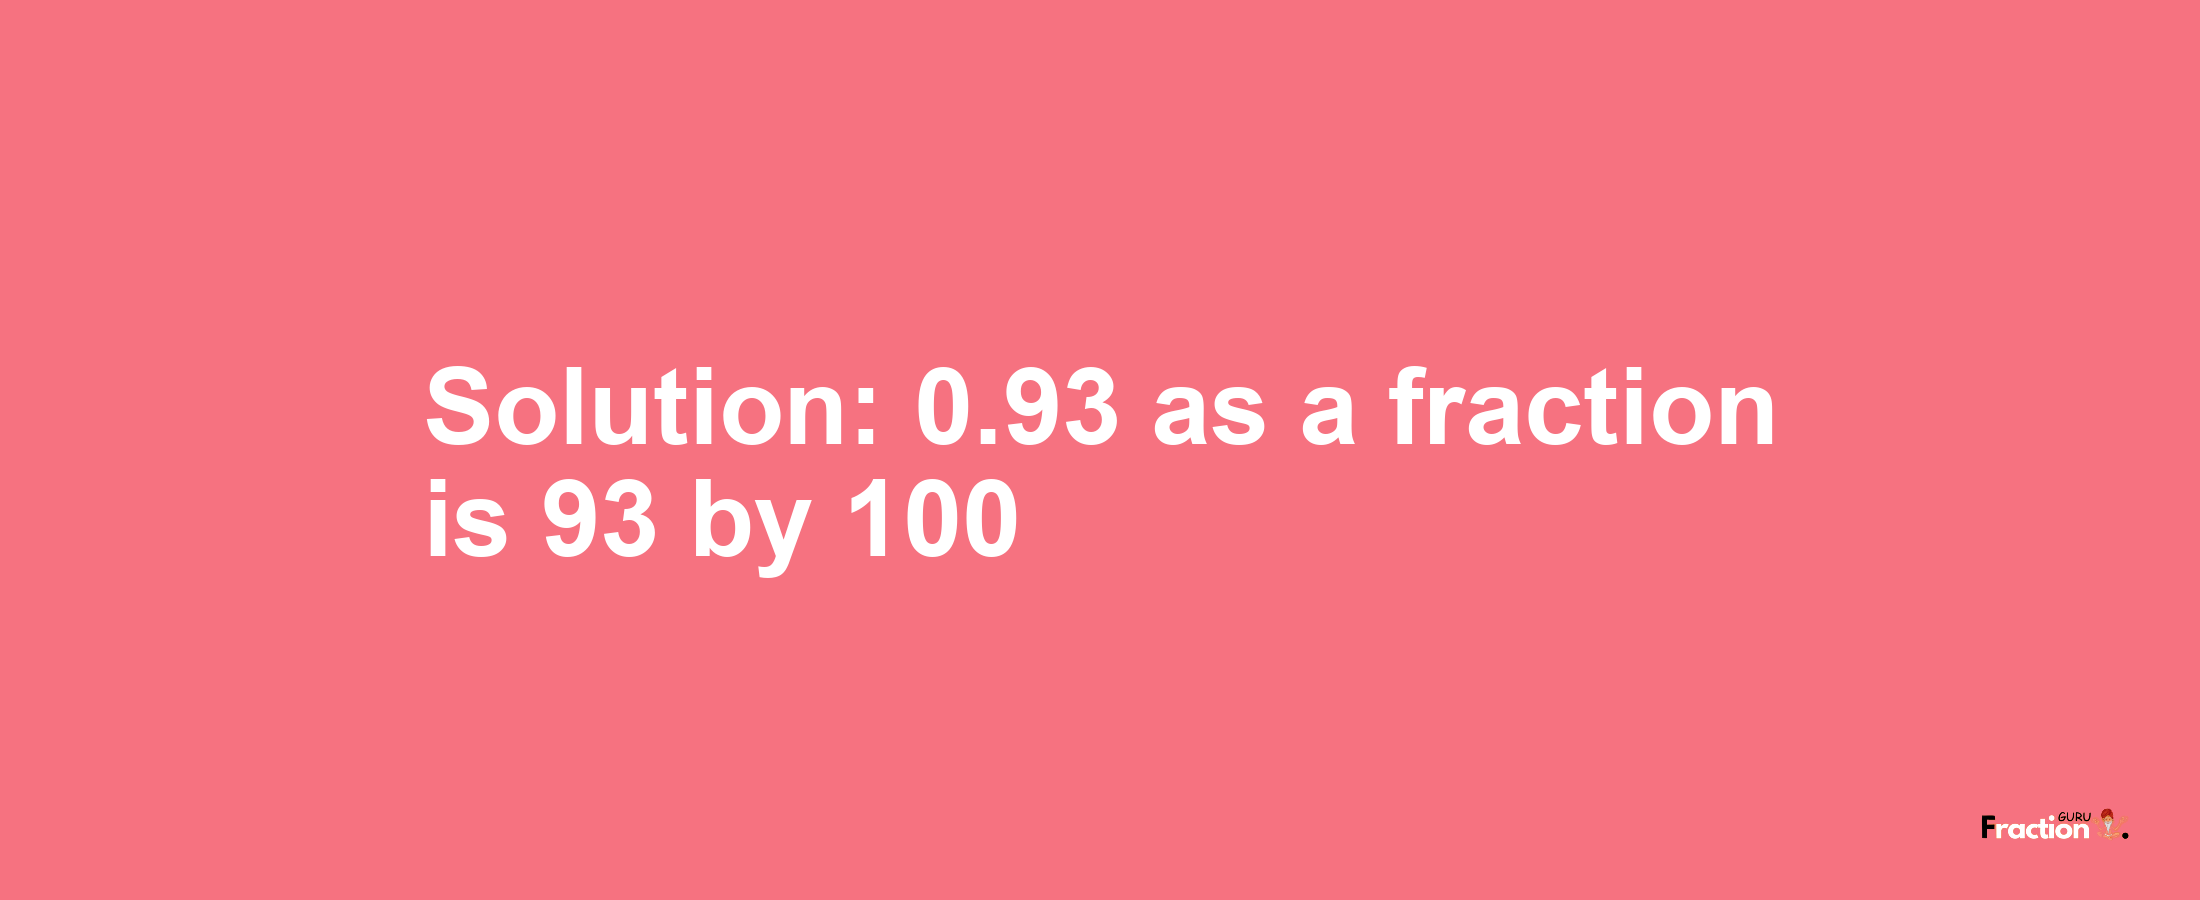 Solution:0.93 as a fraction is 93/100